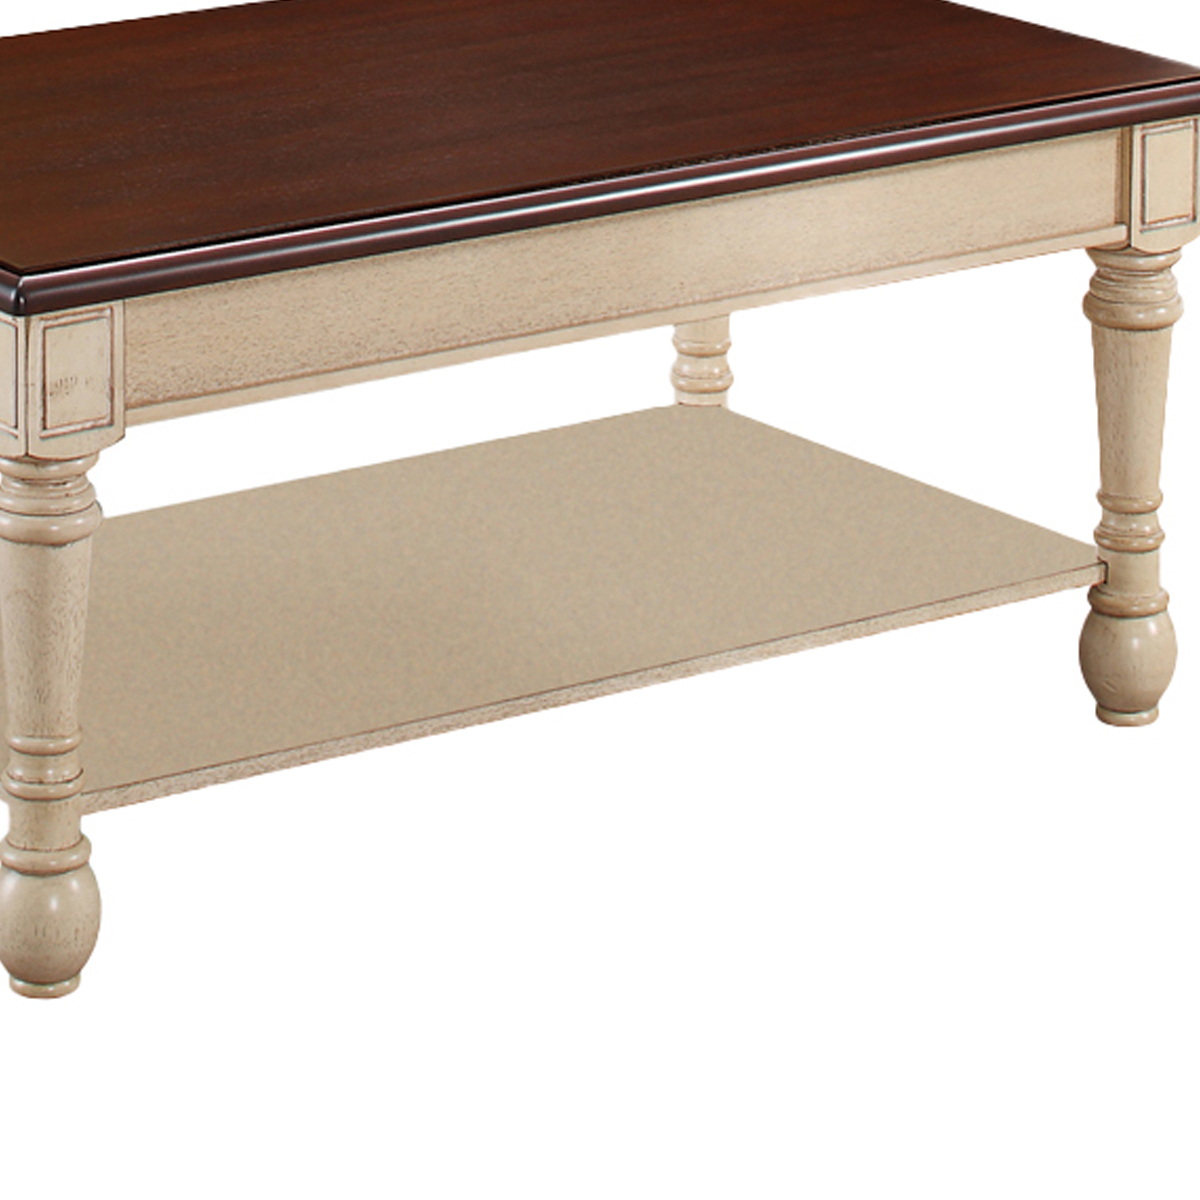 Wooden Frame Coffee Table With Turned Legs, Brown And Antique White- Saltoro Sherpi